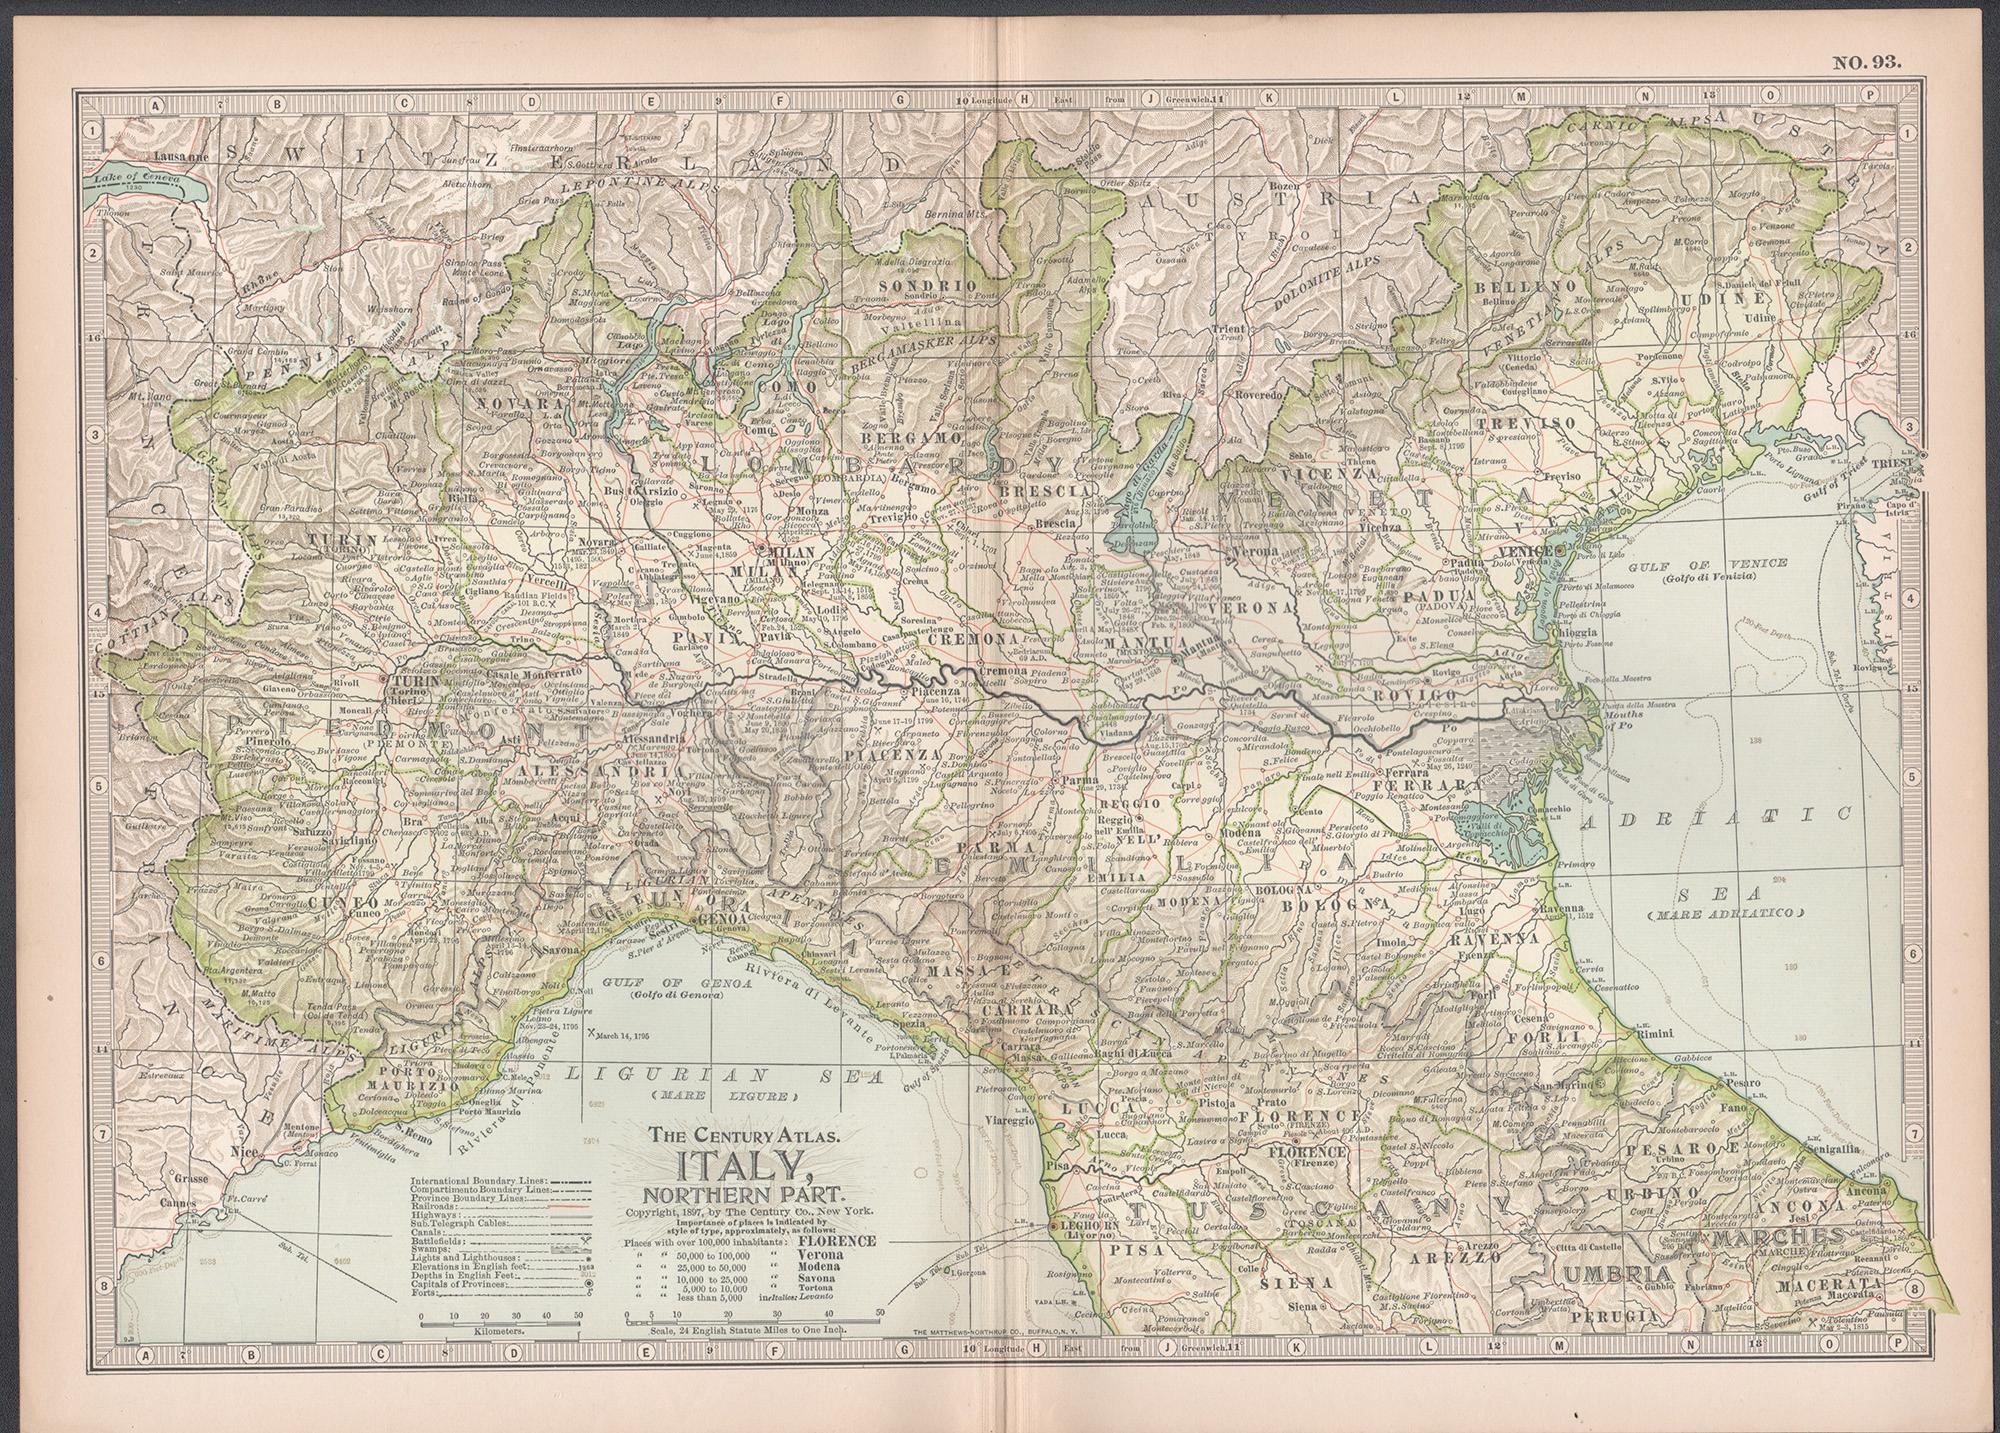 Italy, Northern Part. Century Atlas antique vintage map - Print by Unknown